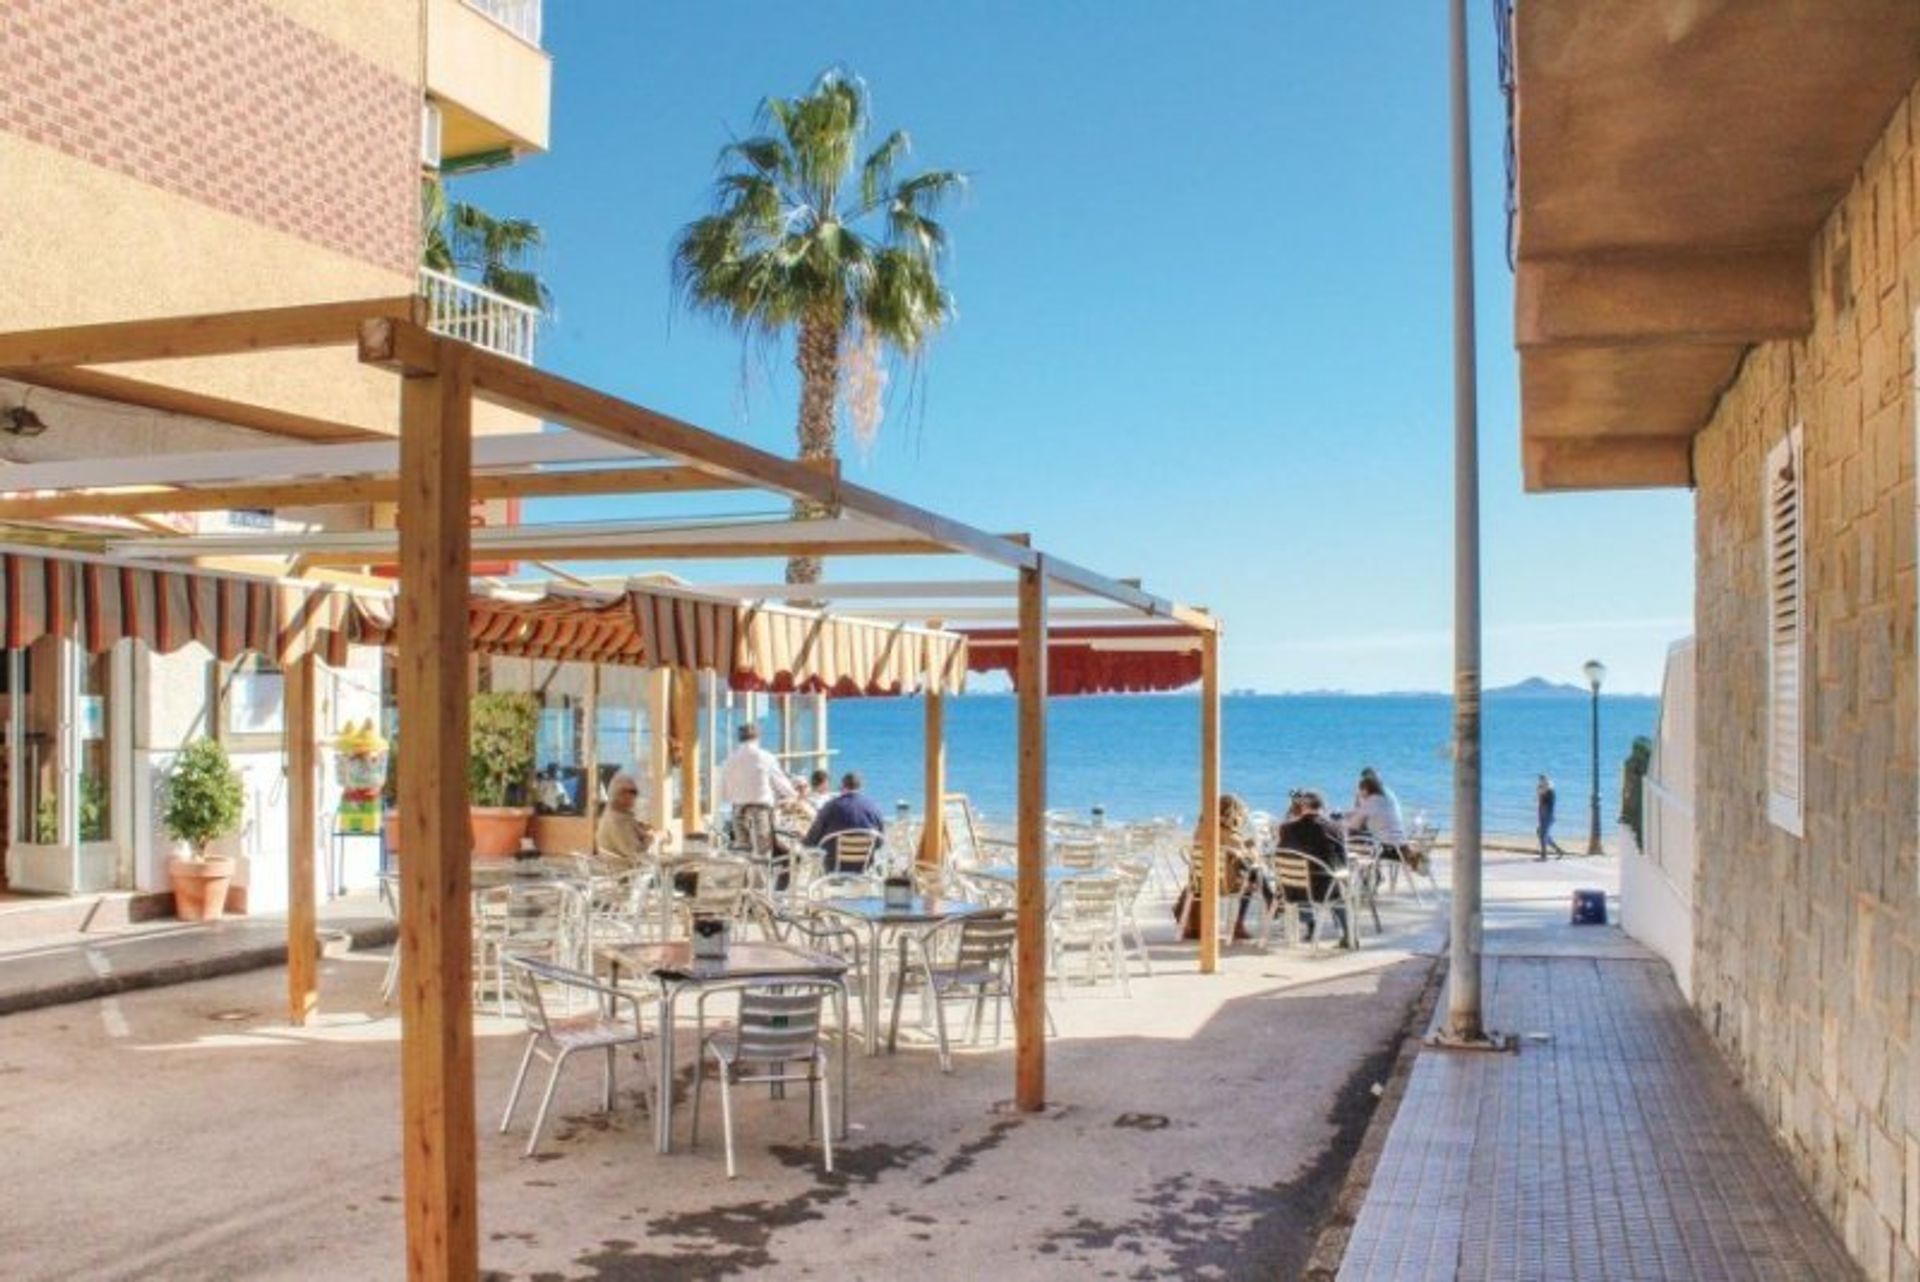 Enjoy glorious views of the coast from one of the many tapas bars dotted along Alcazares' seafront promenade